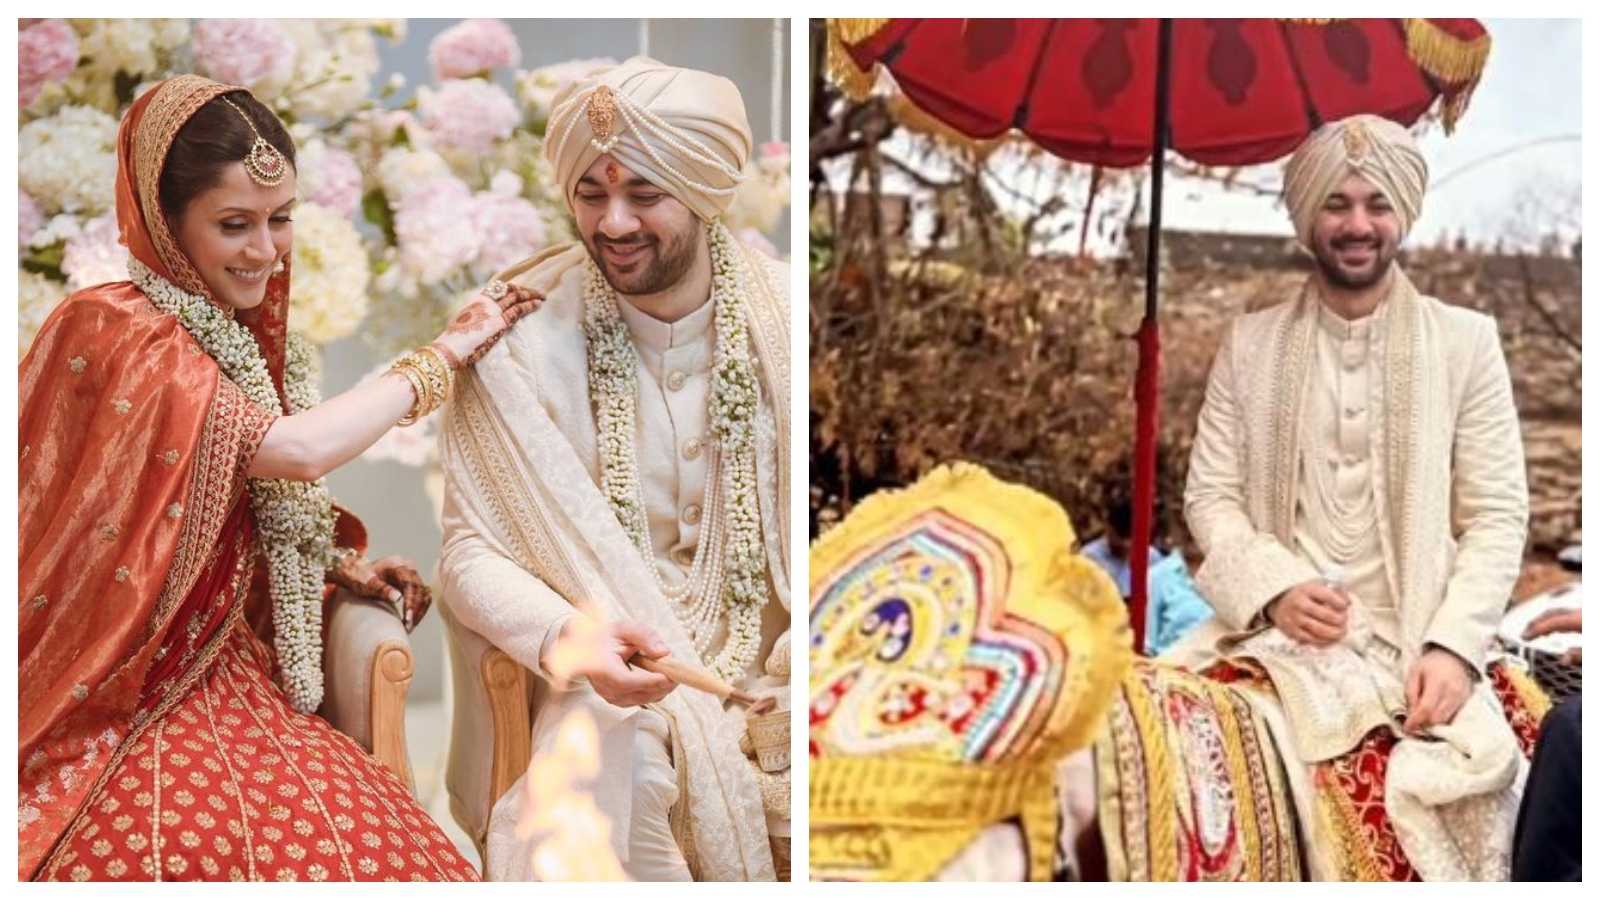 'You are my today...':Newlywed Karan Deol begins beautiful journey with Drisha Acharya; shares wedding pictures